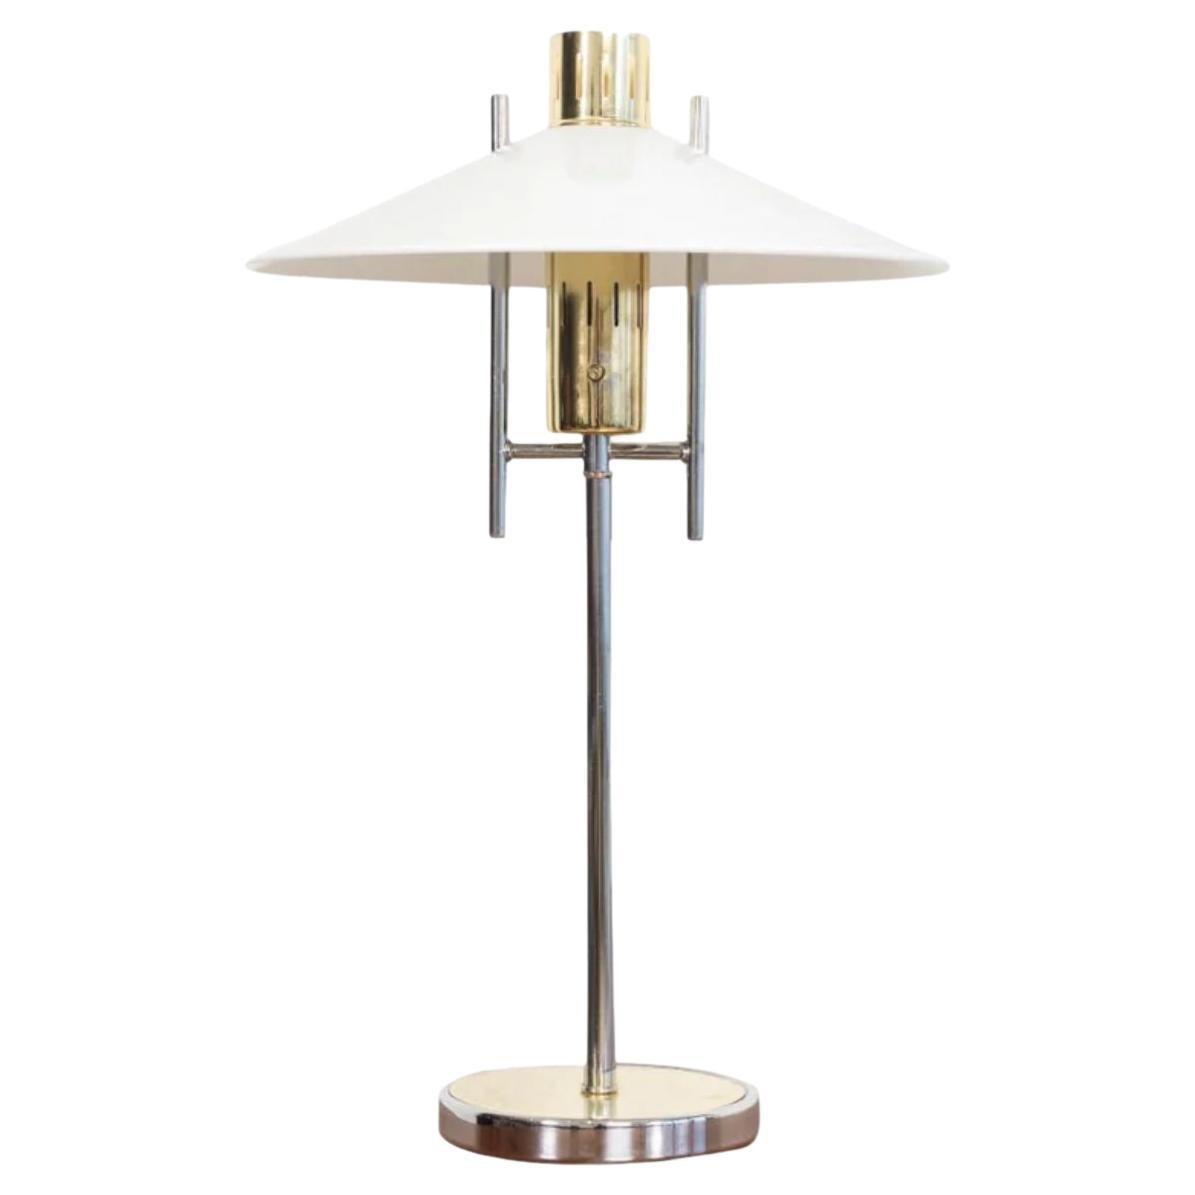 Mid-Century Modern White, Chrome and Brass Table Lamp, 1970s